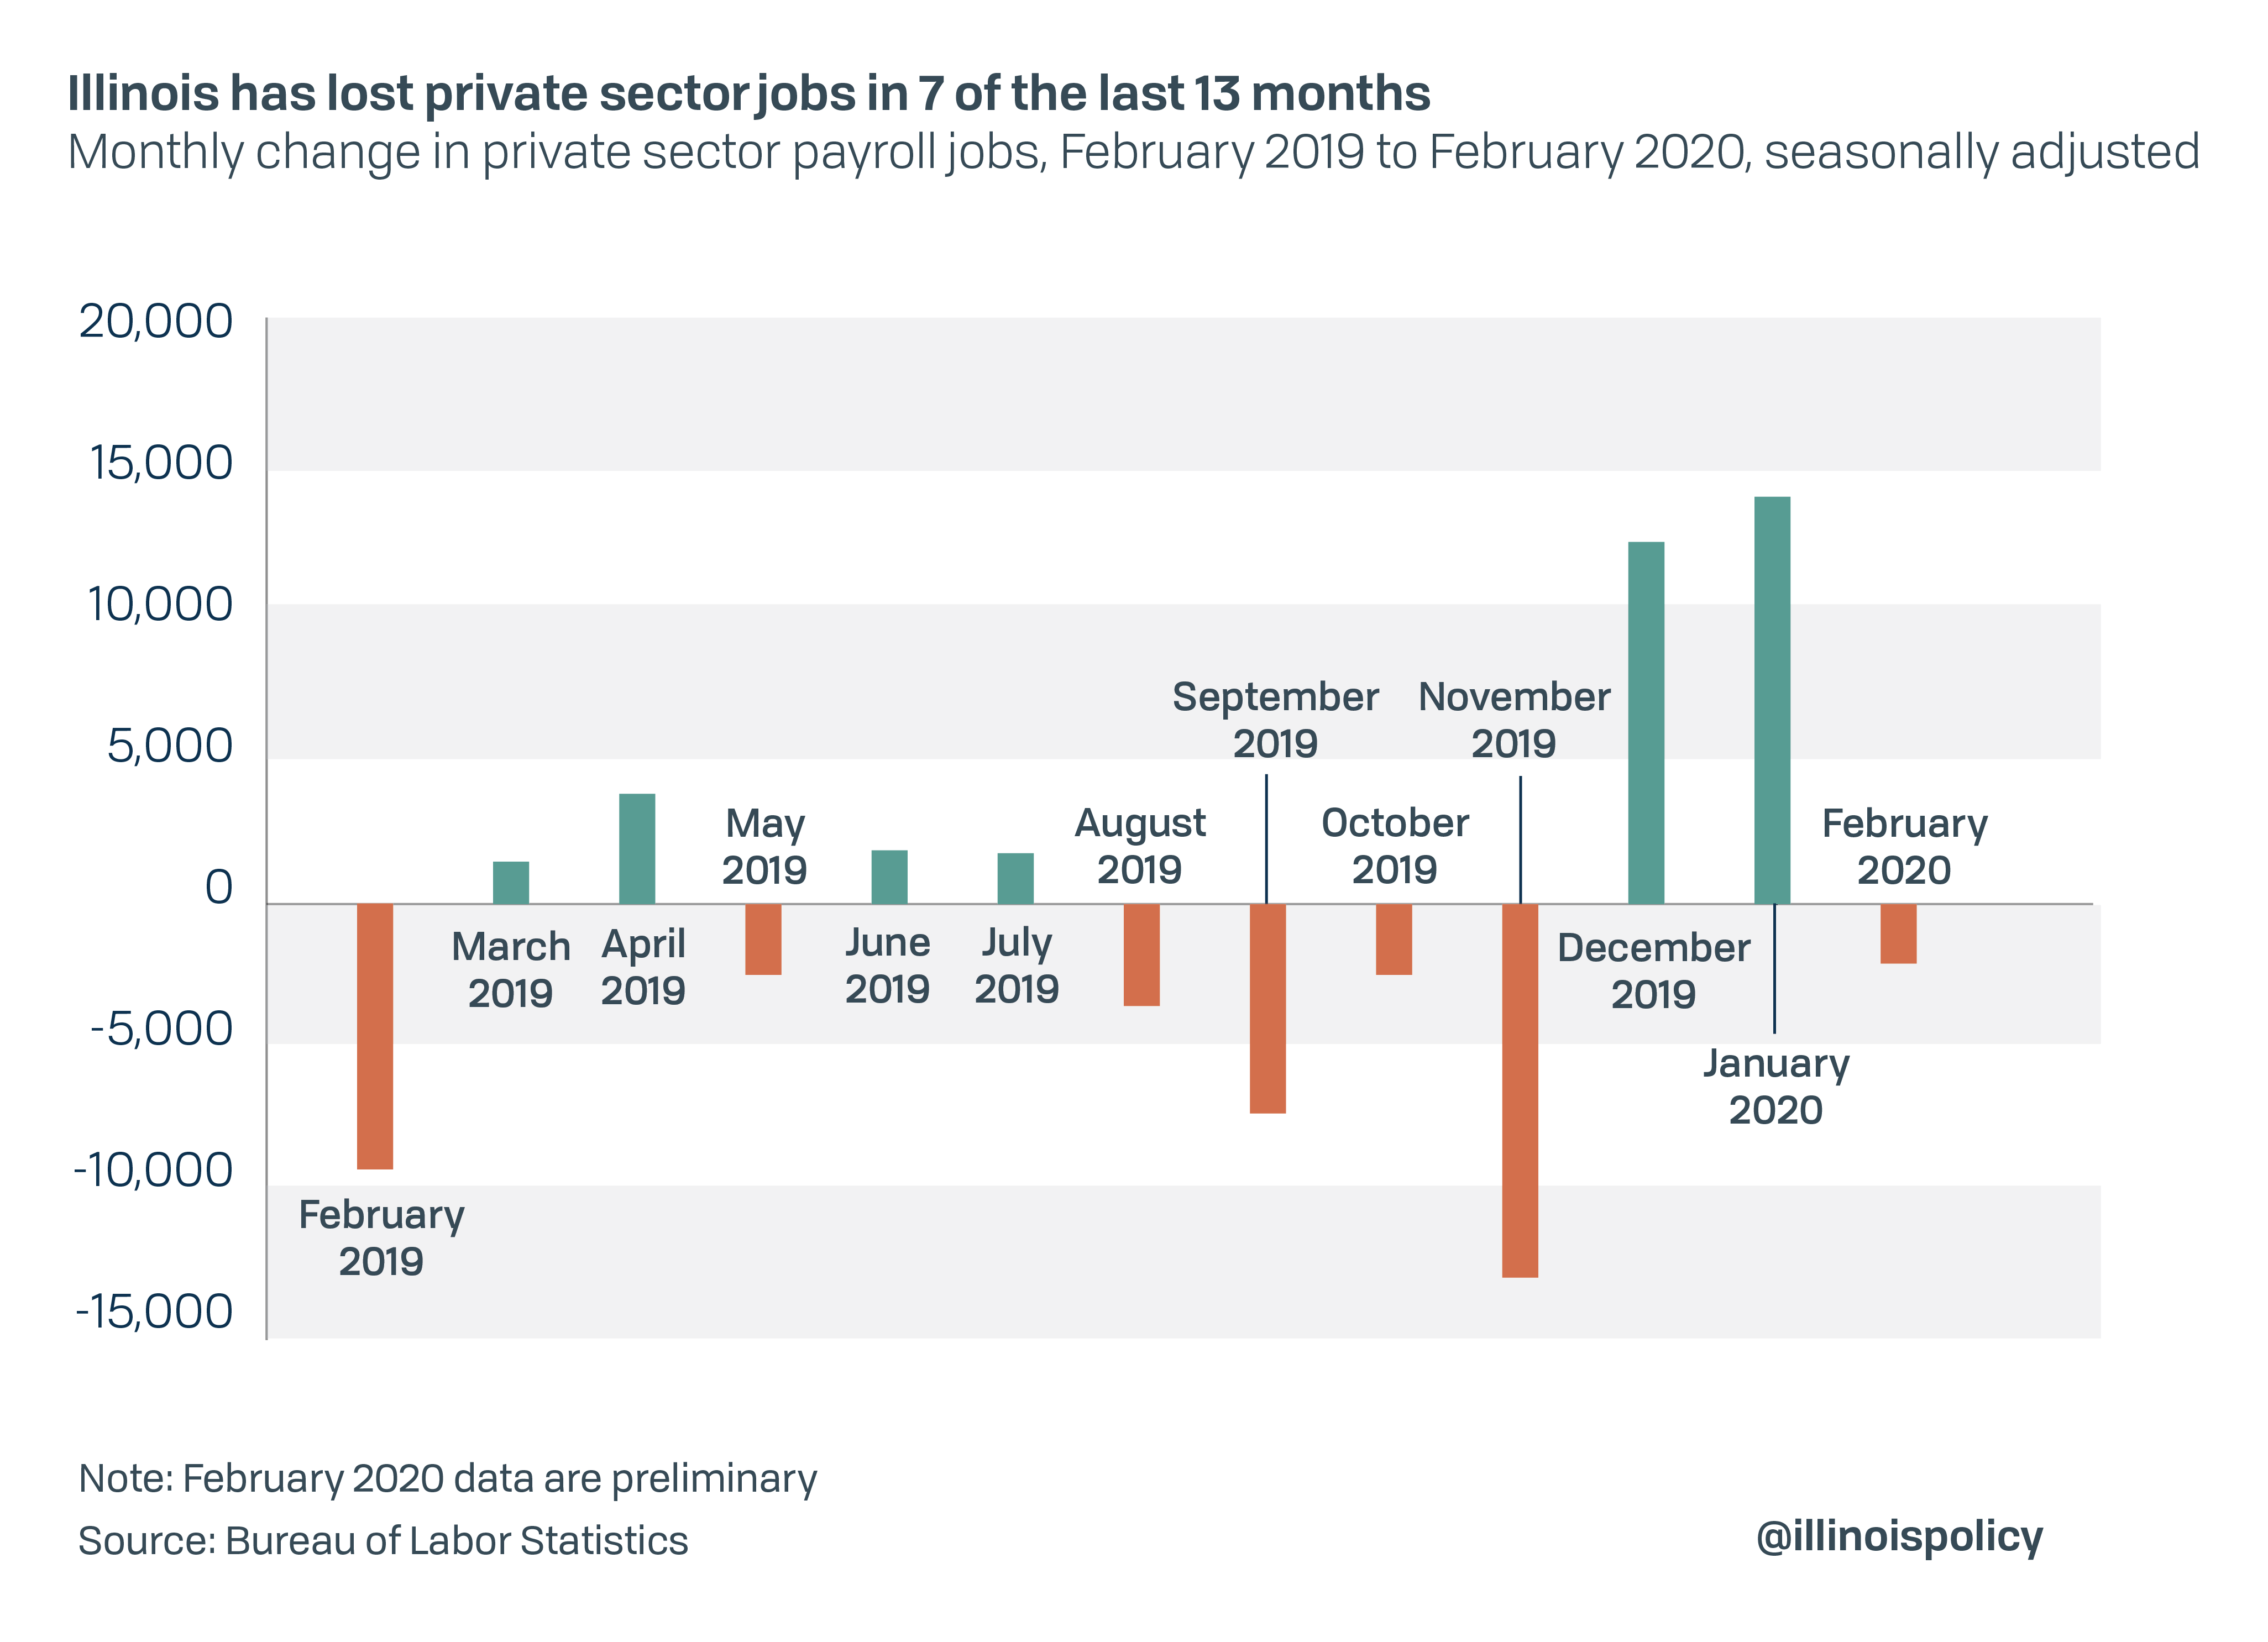 Illinois has lost private sector jobs in 7 of the last 13 months